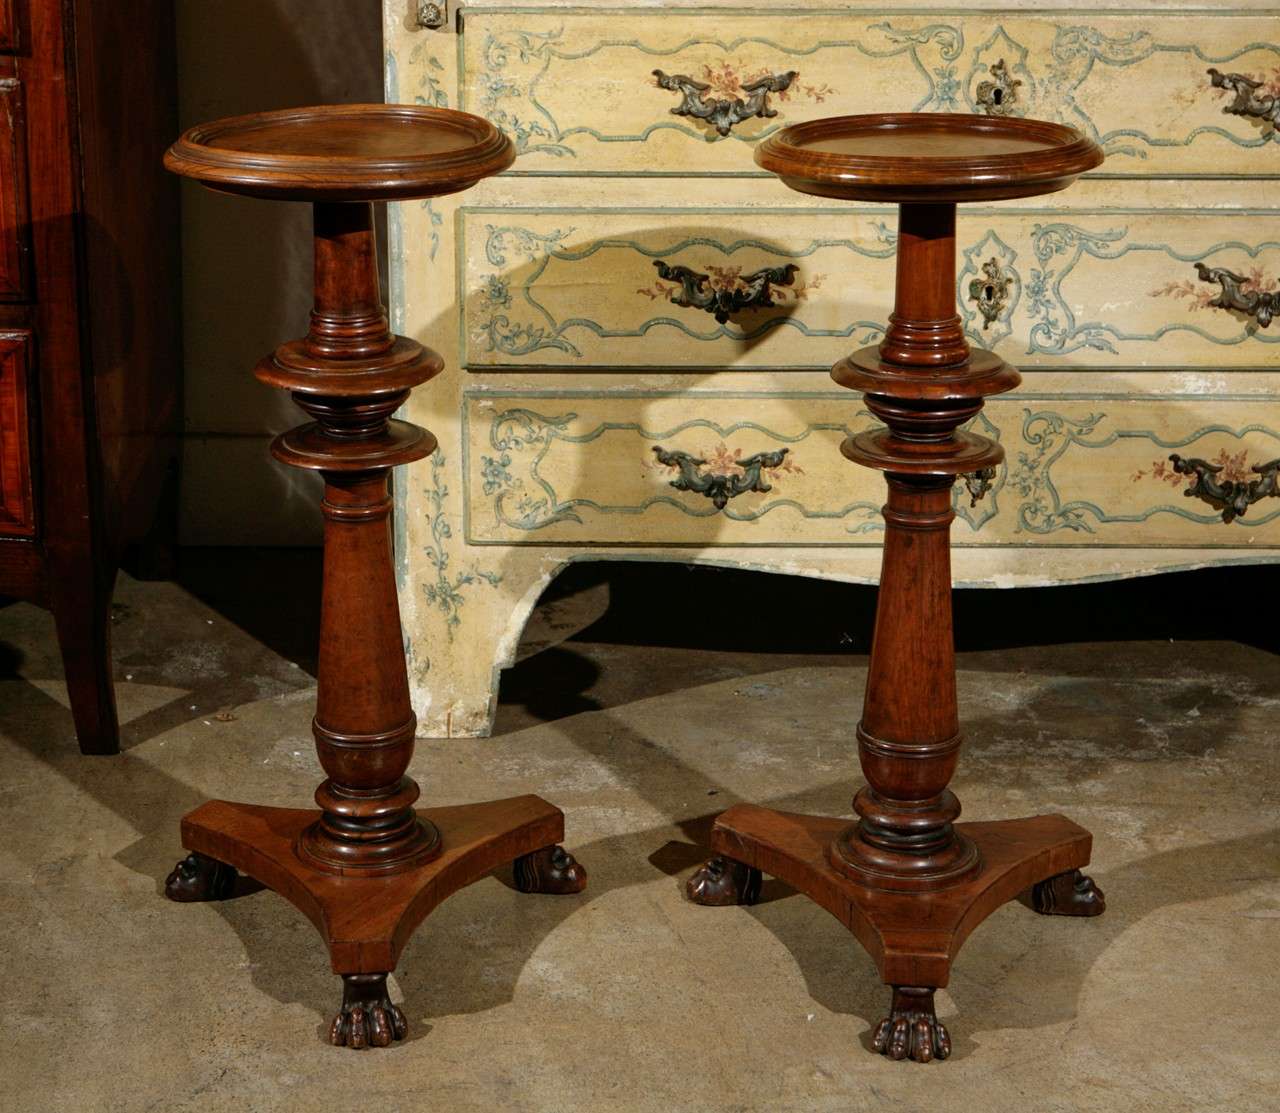 Charming pair of hand-carved, 19th century, walnut side tables with claw feet.